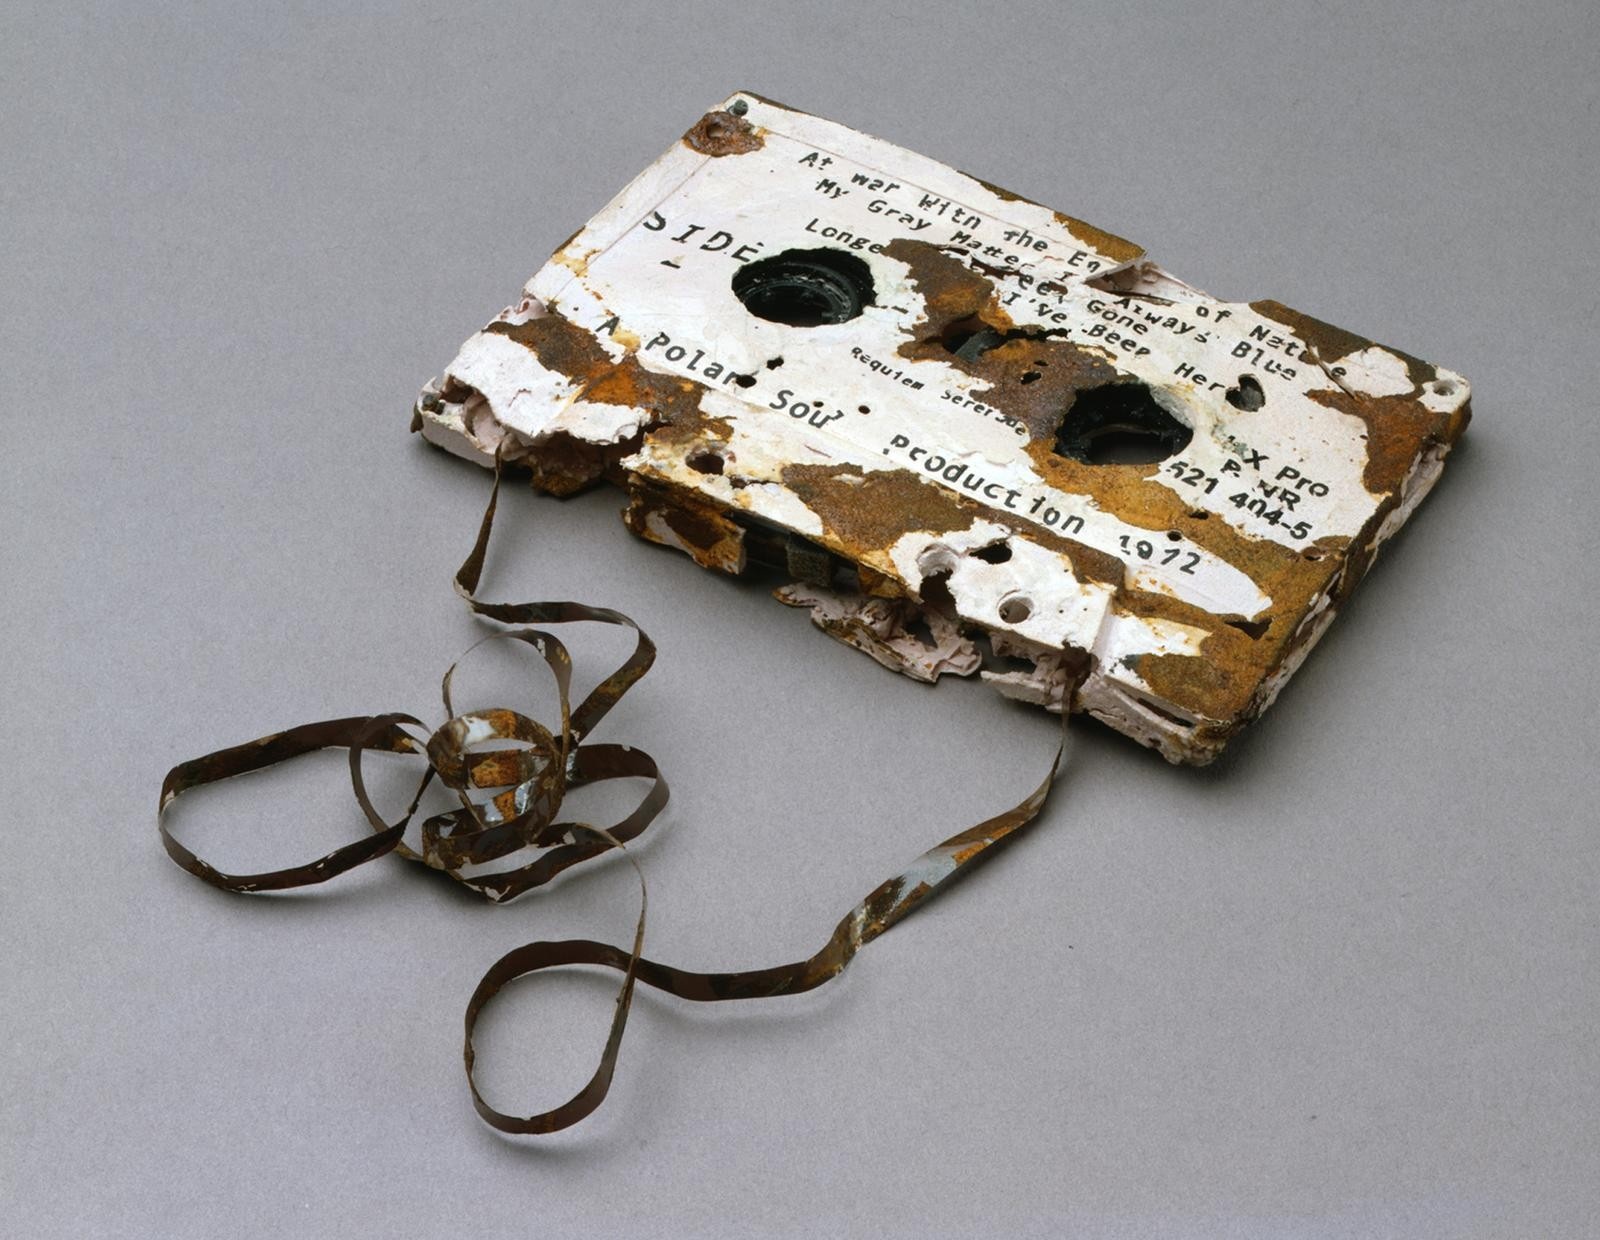 A sculpture of an old, white, rusty cassette tape with some film pulled out and piled next to it.